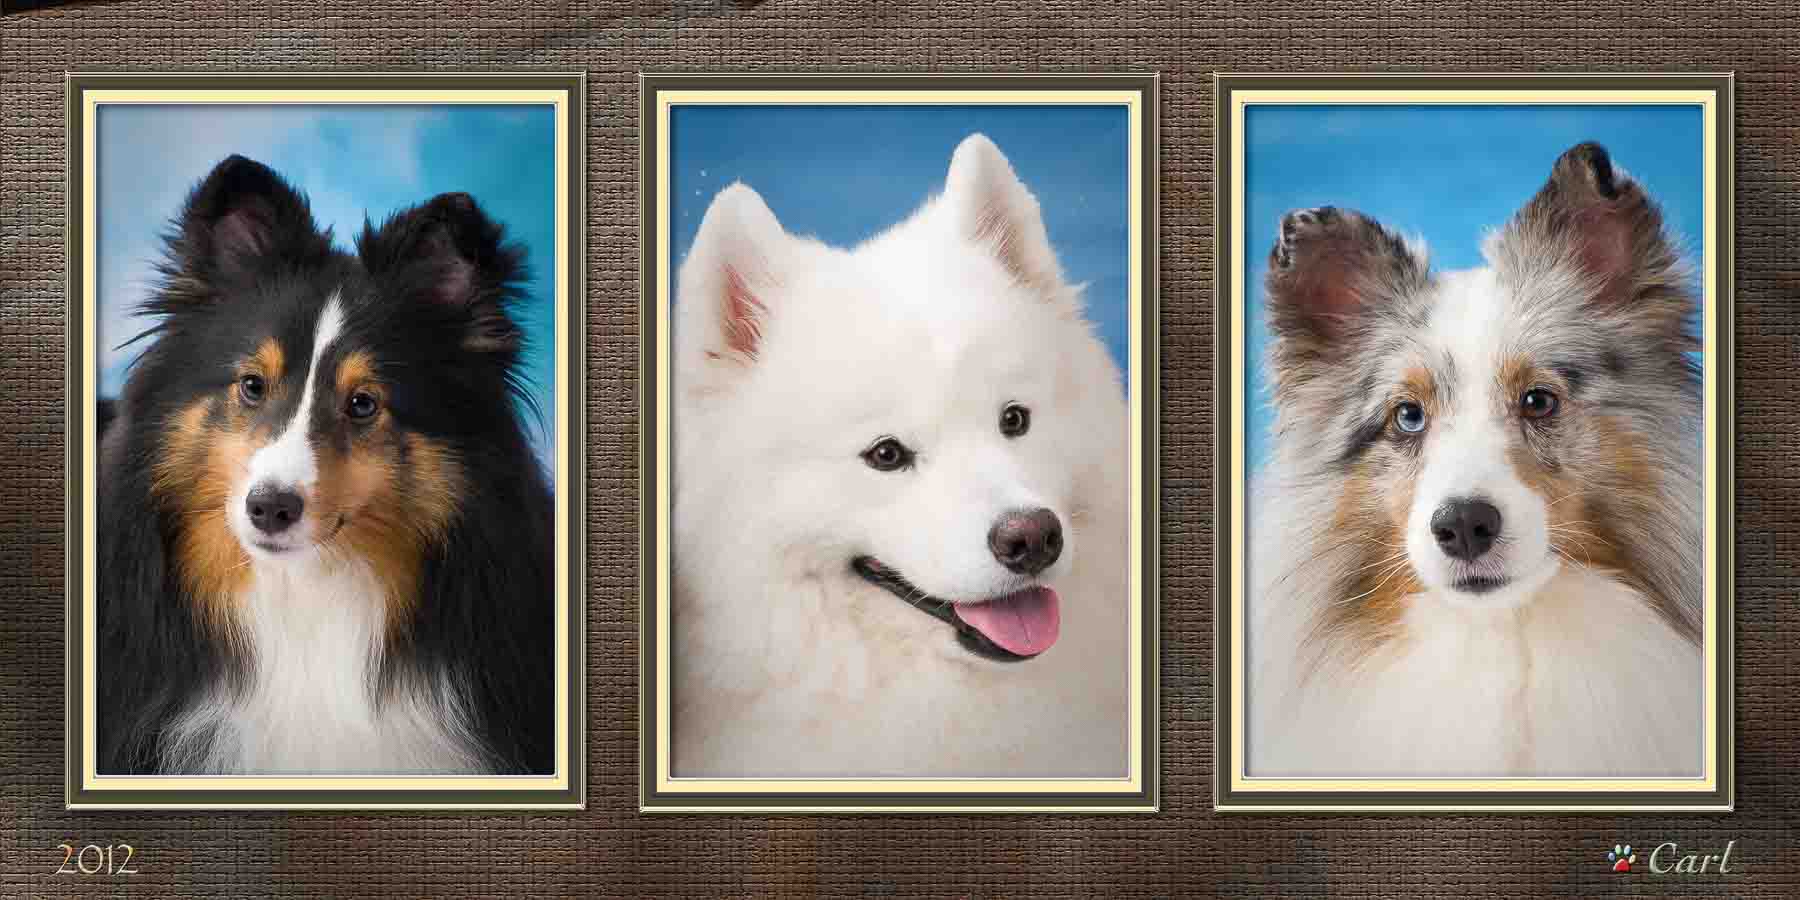 Three dogs are shown in a row of pictures.